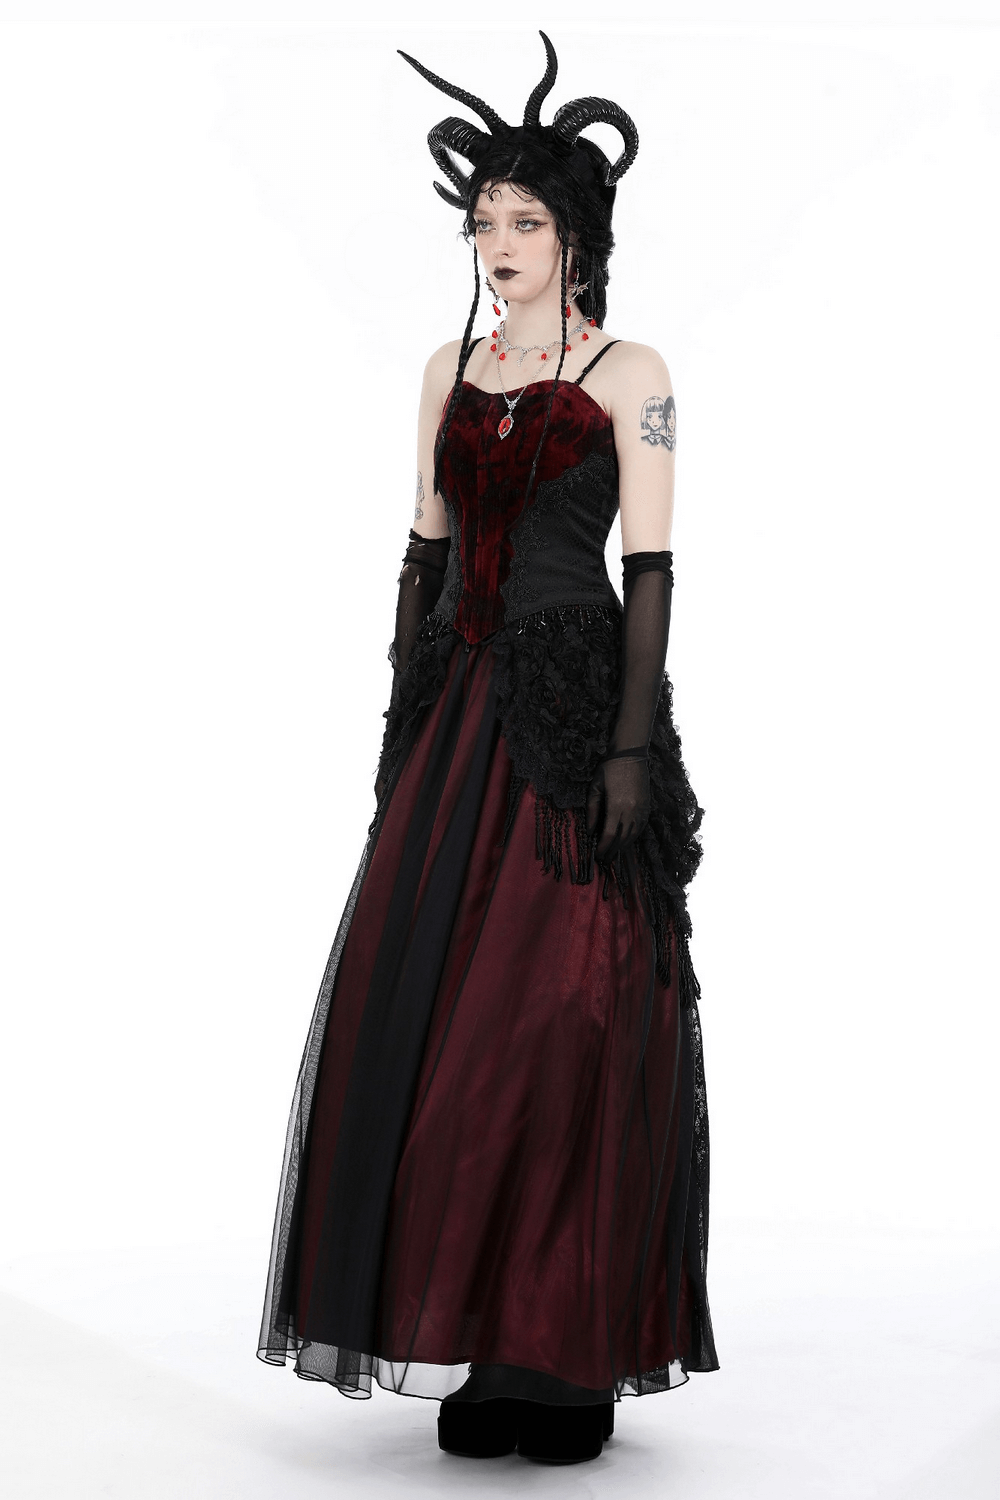 Elegant Velvet and Lace Corset Top with Tassels